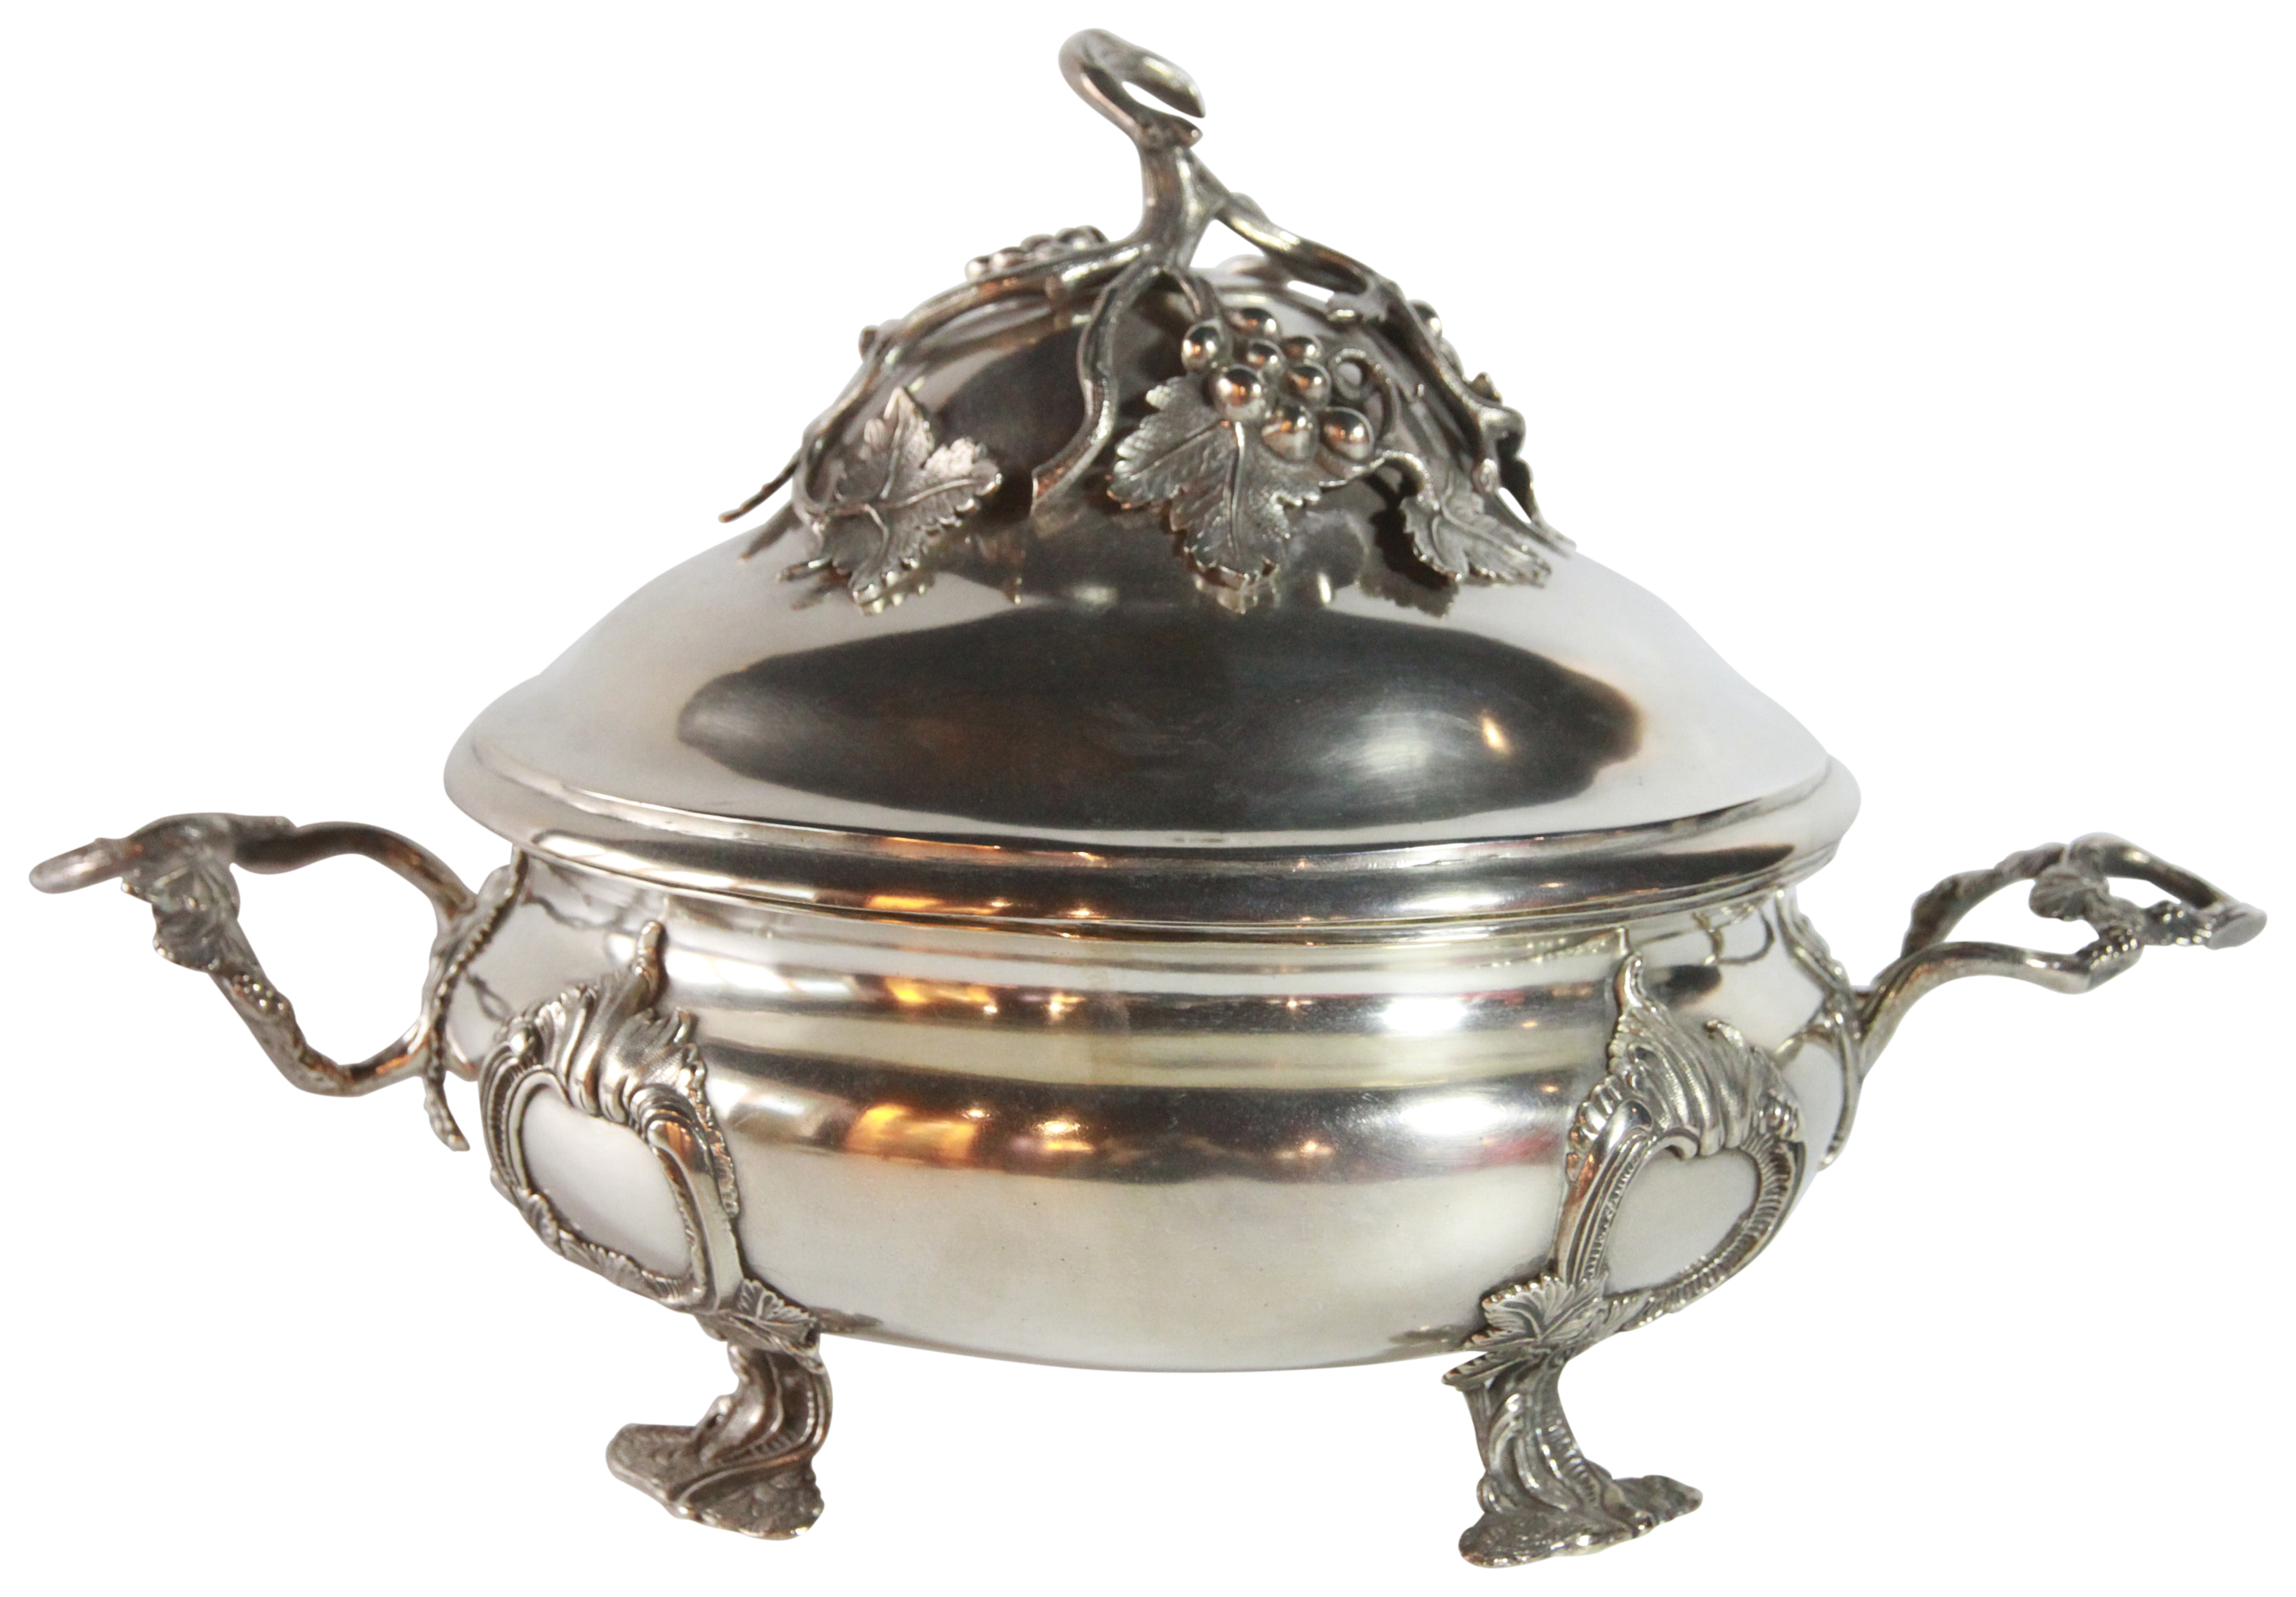 A large German silver tureen & cover with vine shaped handles. (755 grams) (H: 24cm), PROVENANCE: